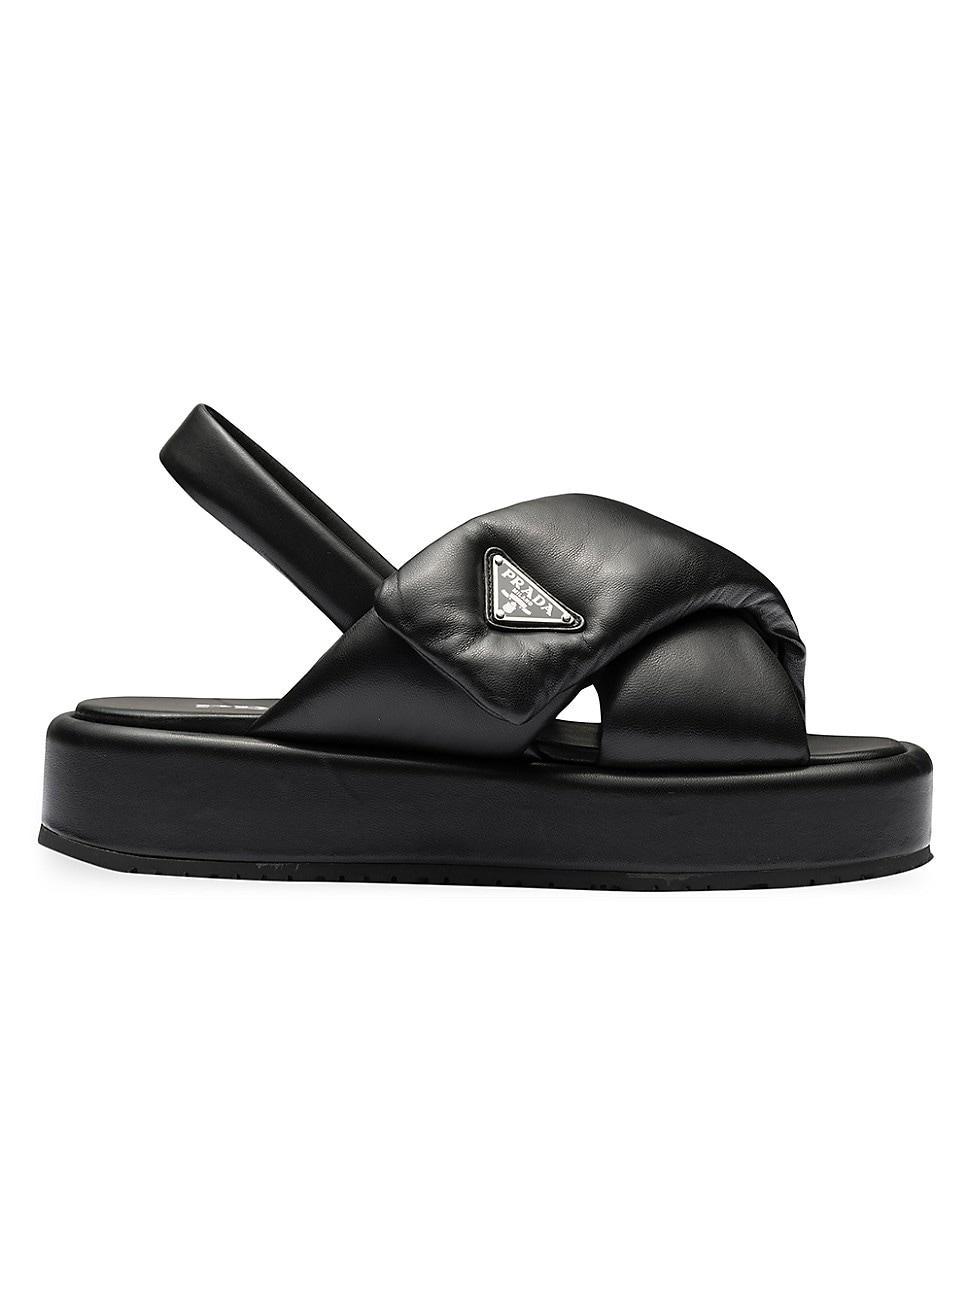 Womens Soft Padded Nappa Leather Wedge Sandals Product Image